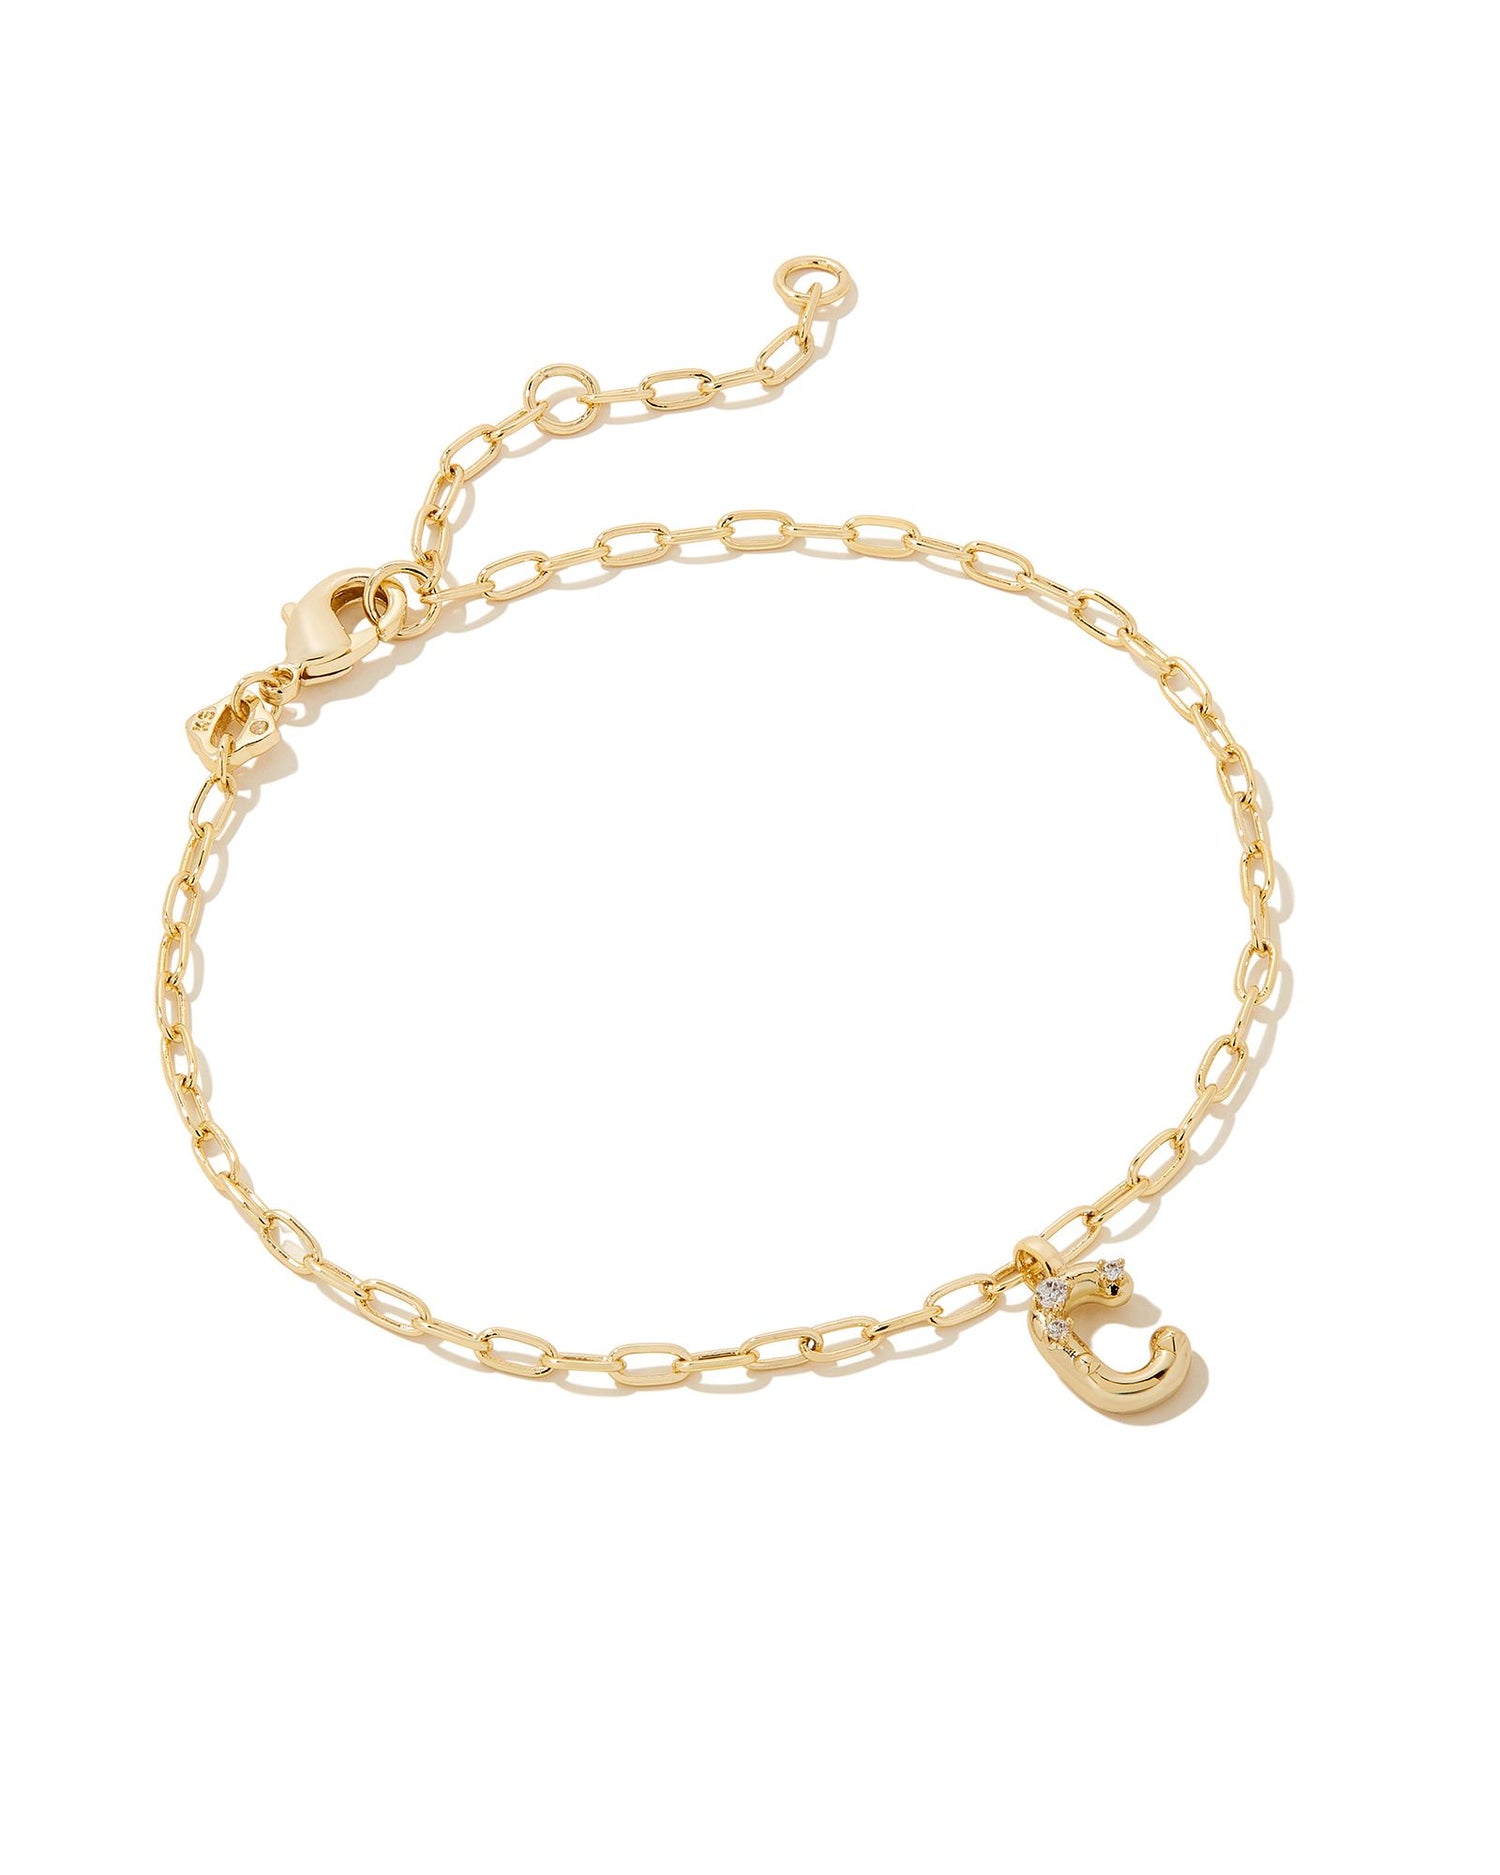 Add a personal touch to your wrist stack with the Crystal Delicate Chain Bracelet in White Crystal, our first Fashion Jewelry initial bracelet. Featuring a dainty chain and letter charm with a hint of sparkle, this bracelet is the perfect way to celebrate the ones you love—including yourself!  Dimensions- 6.5' CHAIN WITH 1.5' EXTENDER, 0.45'L X 0.26"W PENDANT Metal- 14K Gold plated over brass Closure- Lobster Clasp Material-  White CZ Letter C